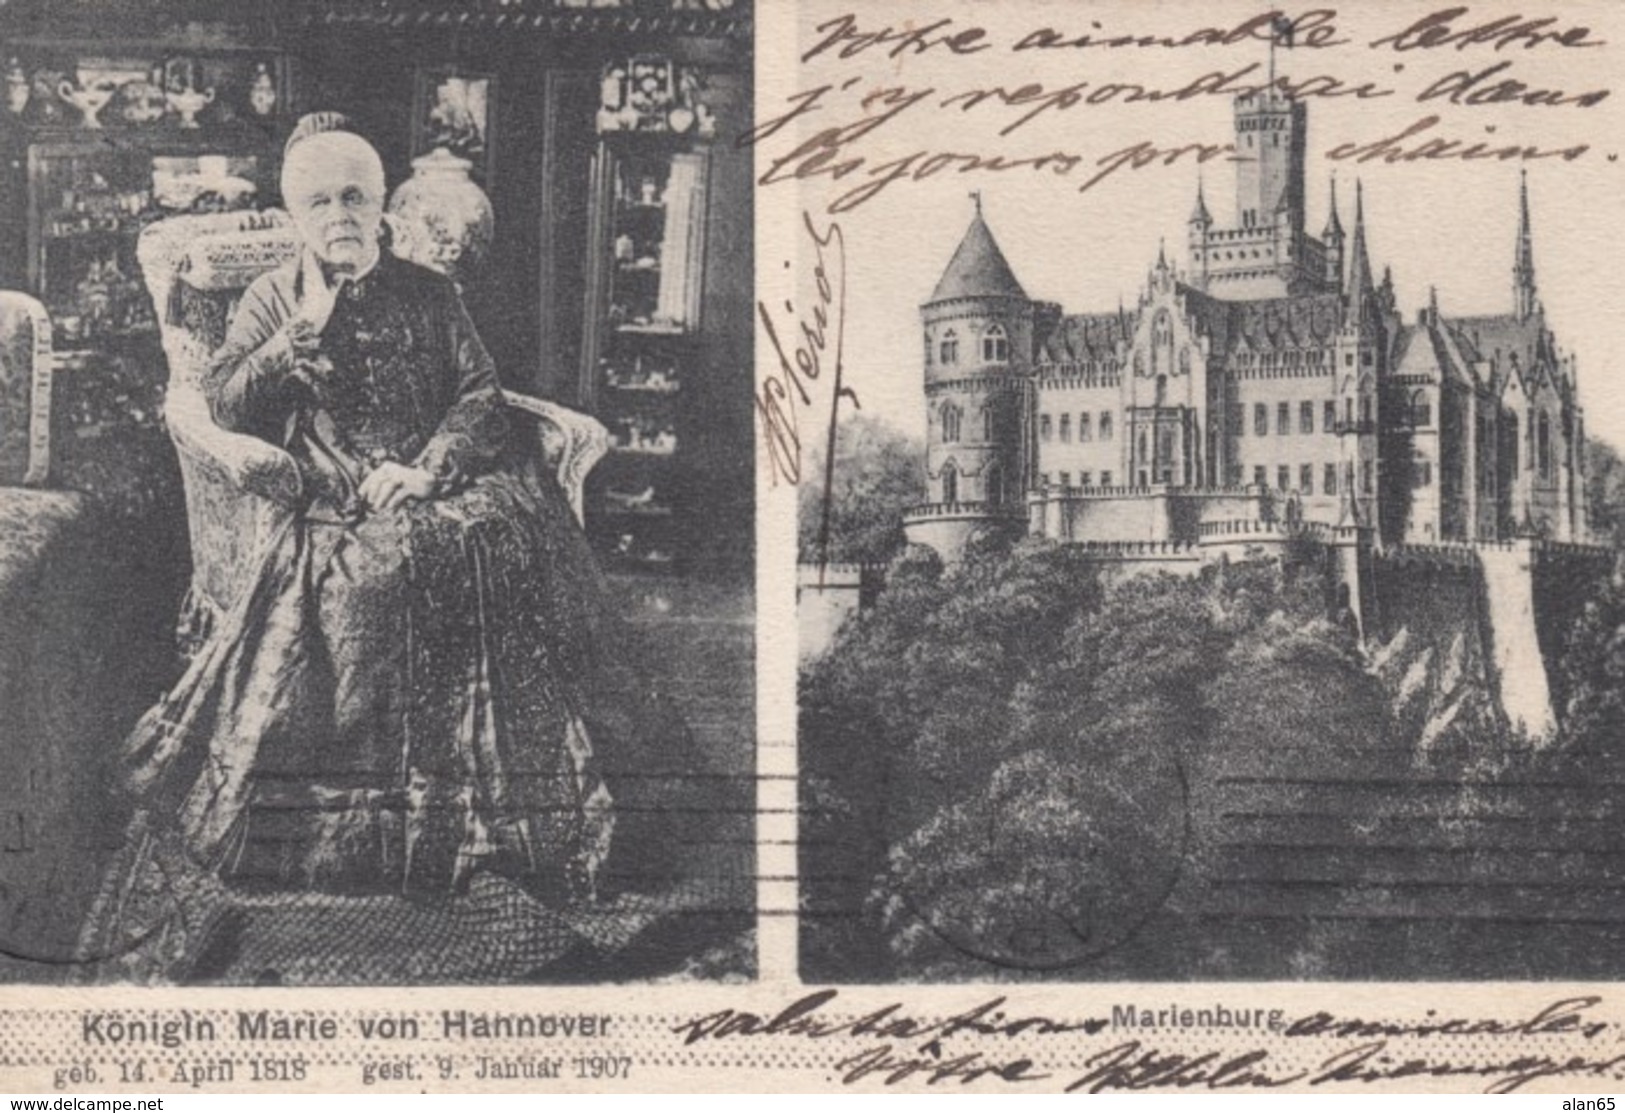 Queen Marie Of Hannover Memoriam And Marienburg Castle, 1900s Vintage Postcard - Royal Families